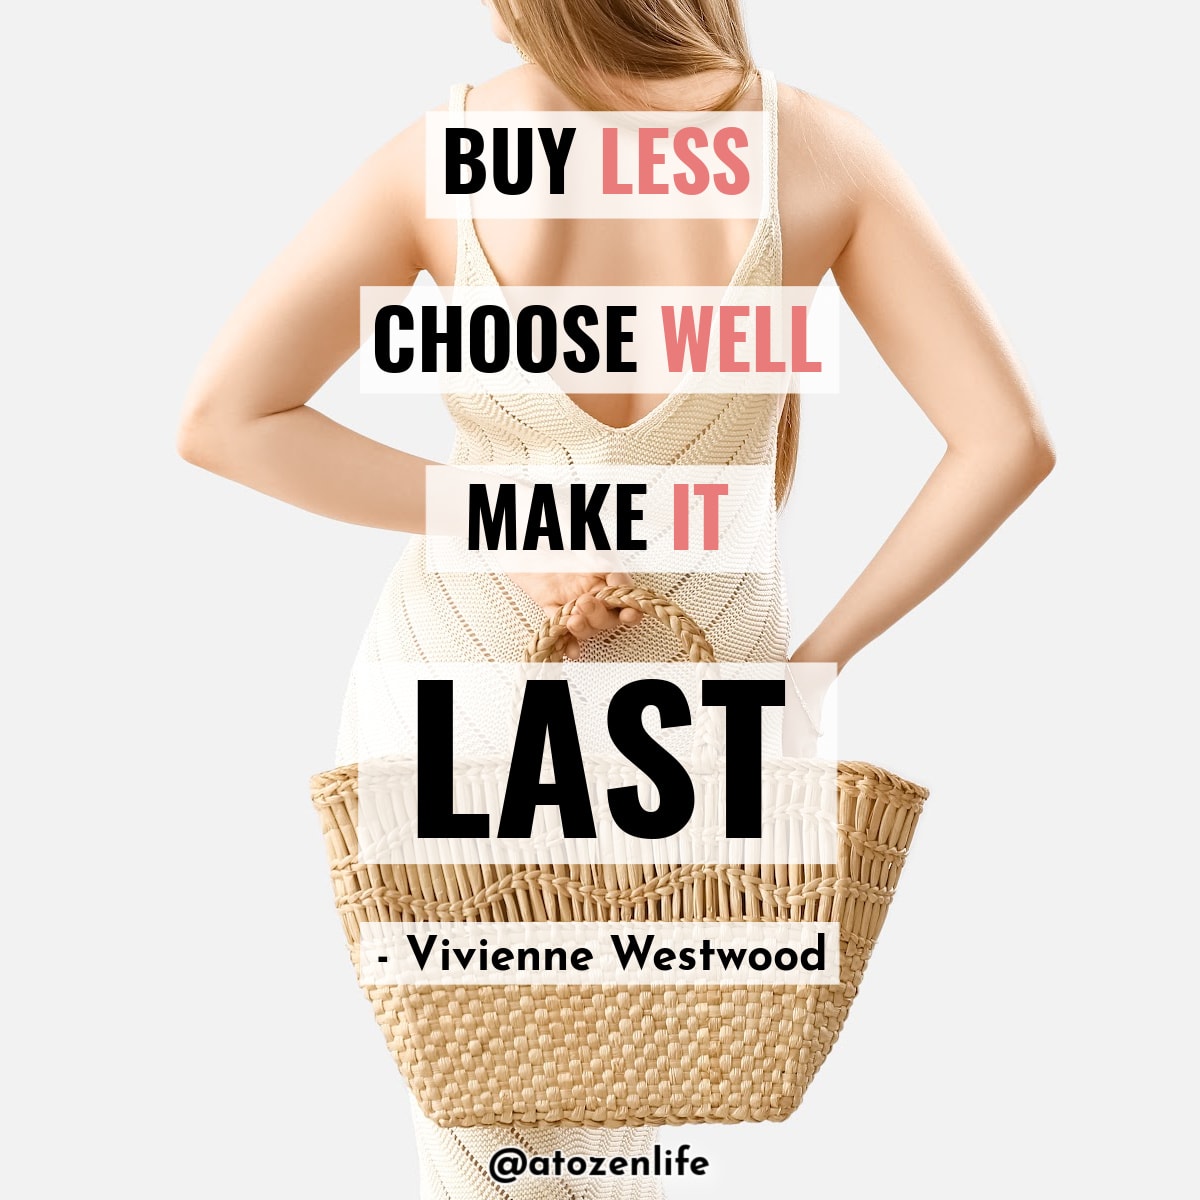 A minimalist wardrobe quote by Vivienne Westwood: "Buy less, choose well, make it last."